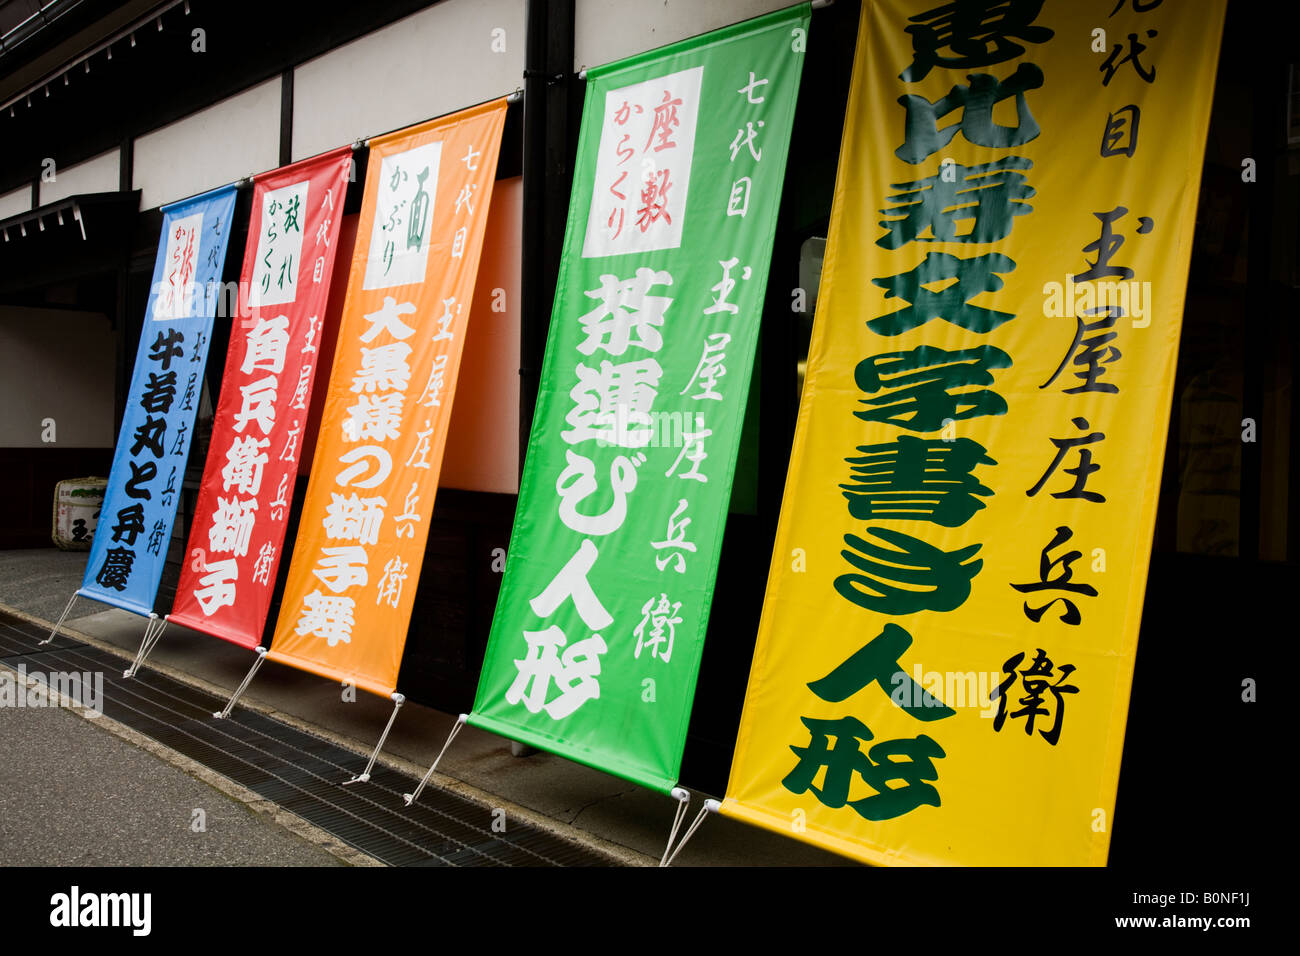 Japanese Banners Stock Photo